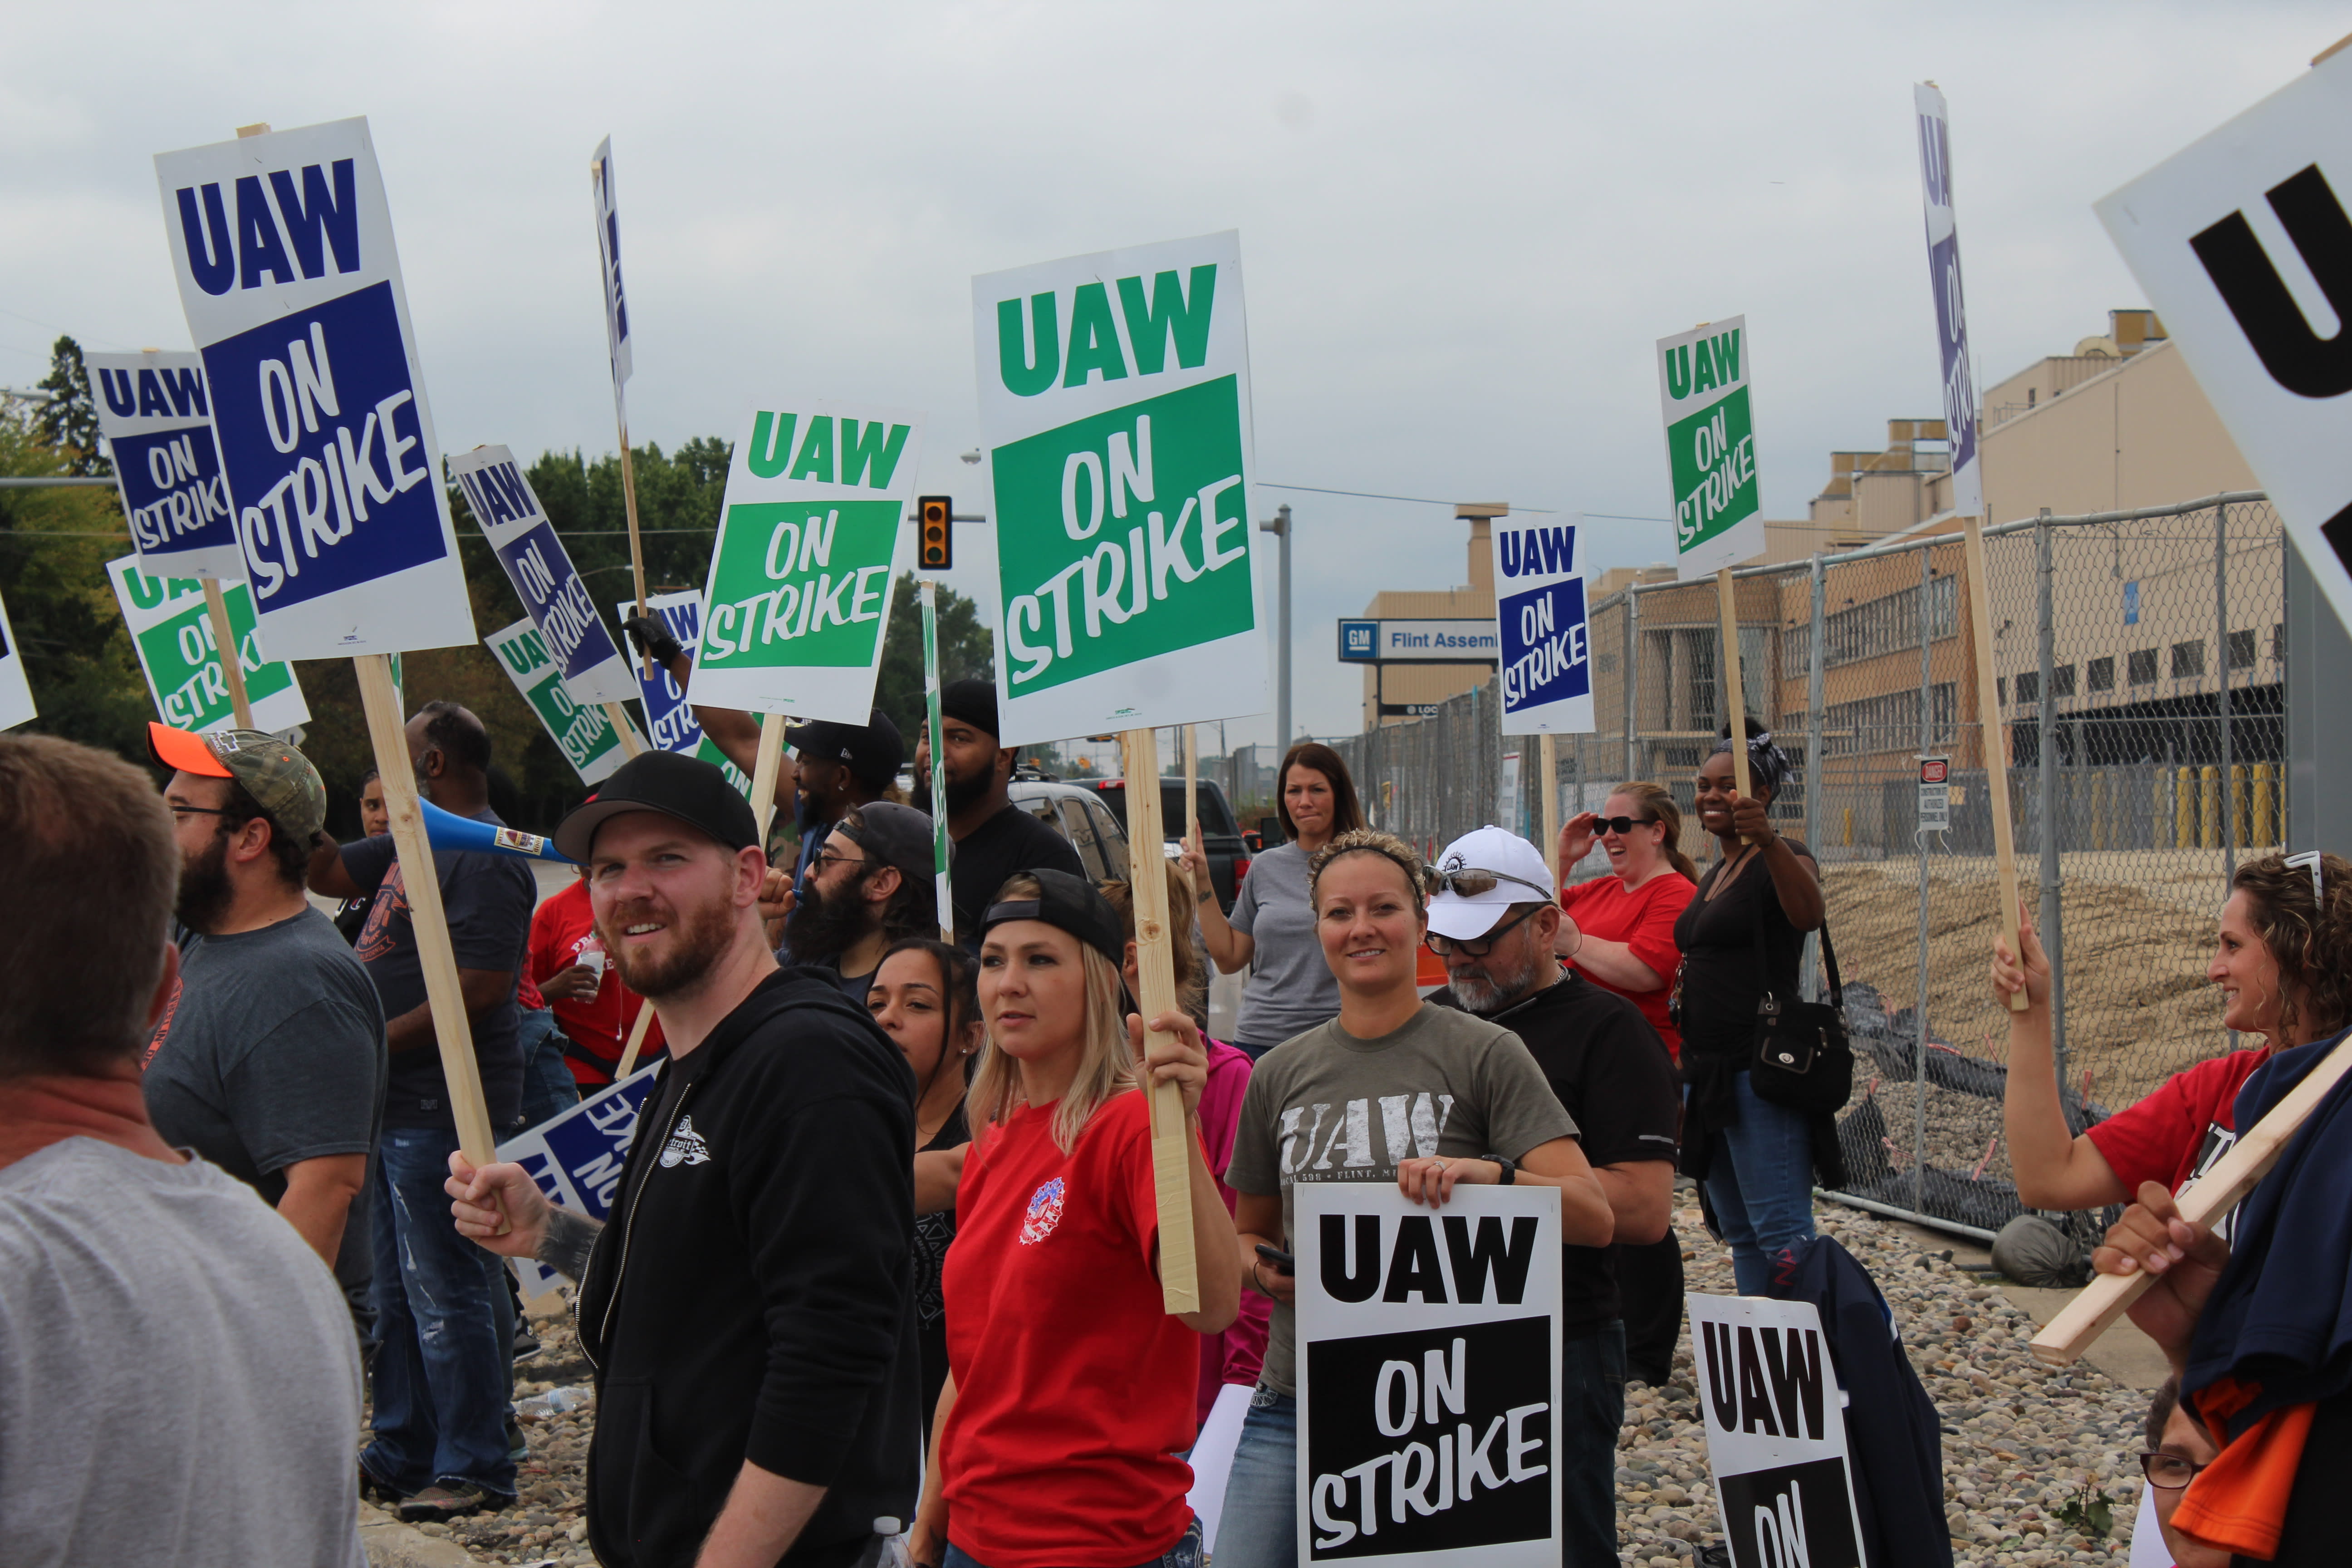 GM, White House deny Politico report of administration involvement in UAW talks